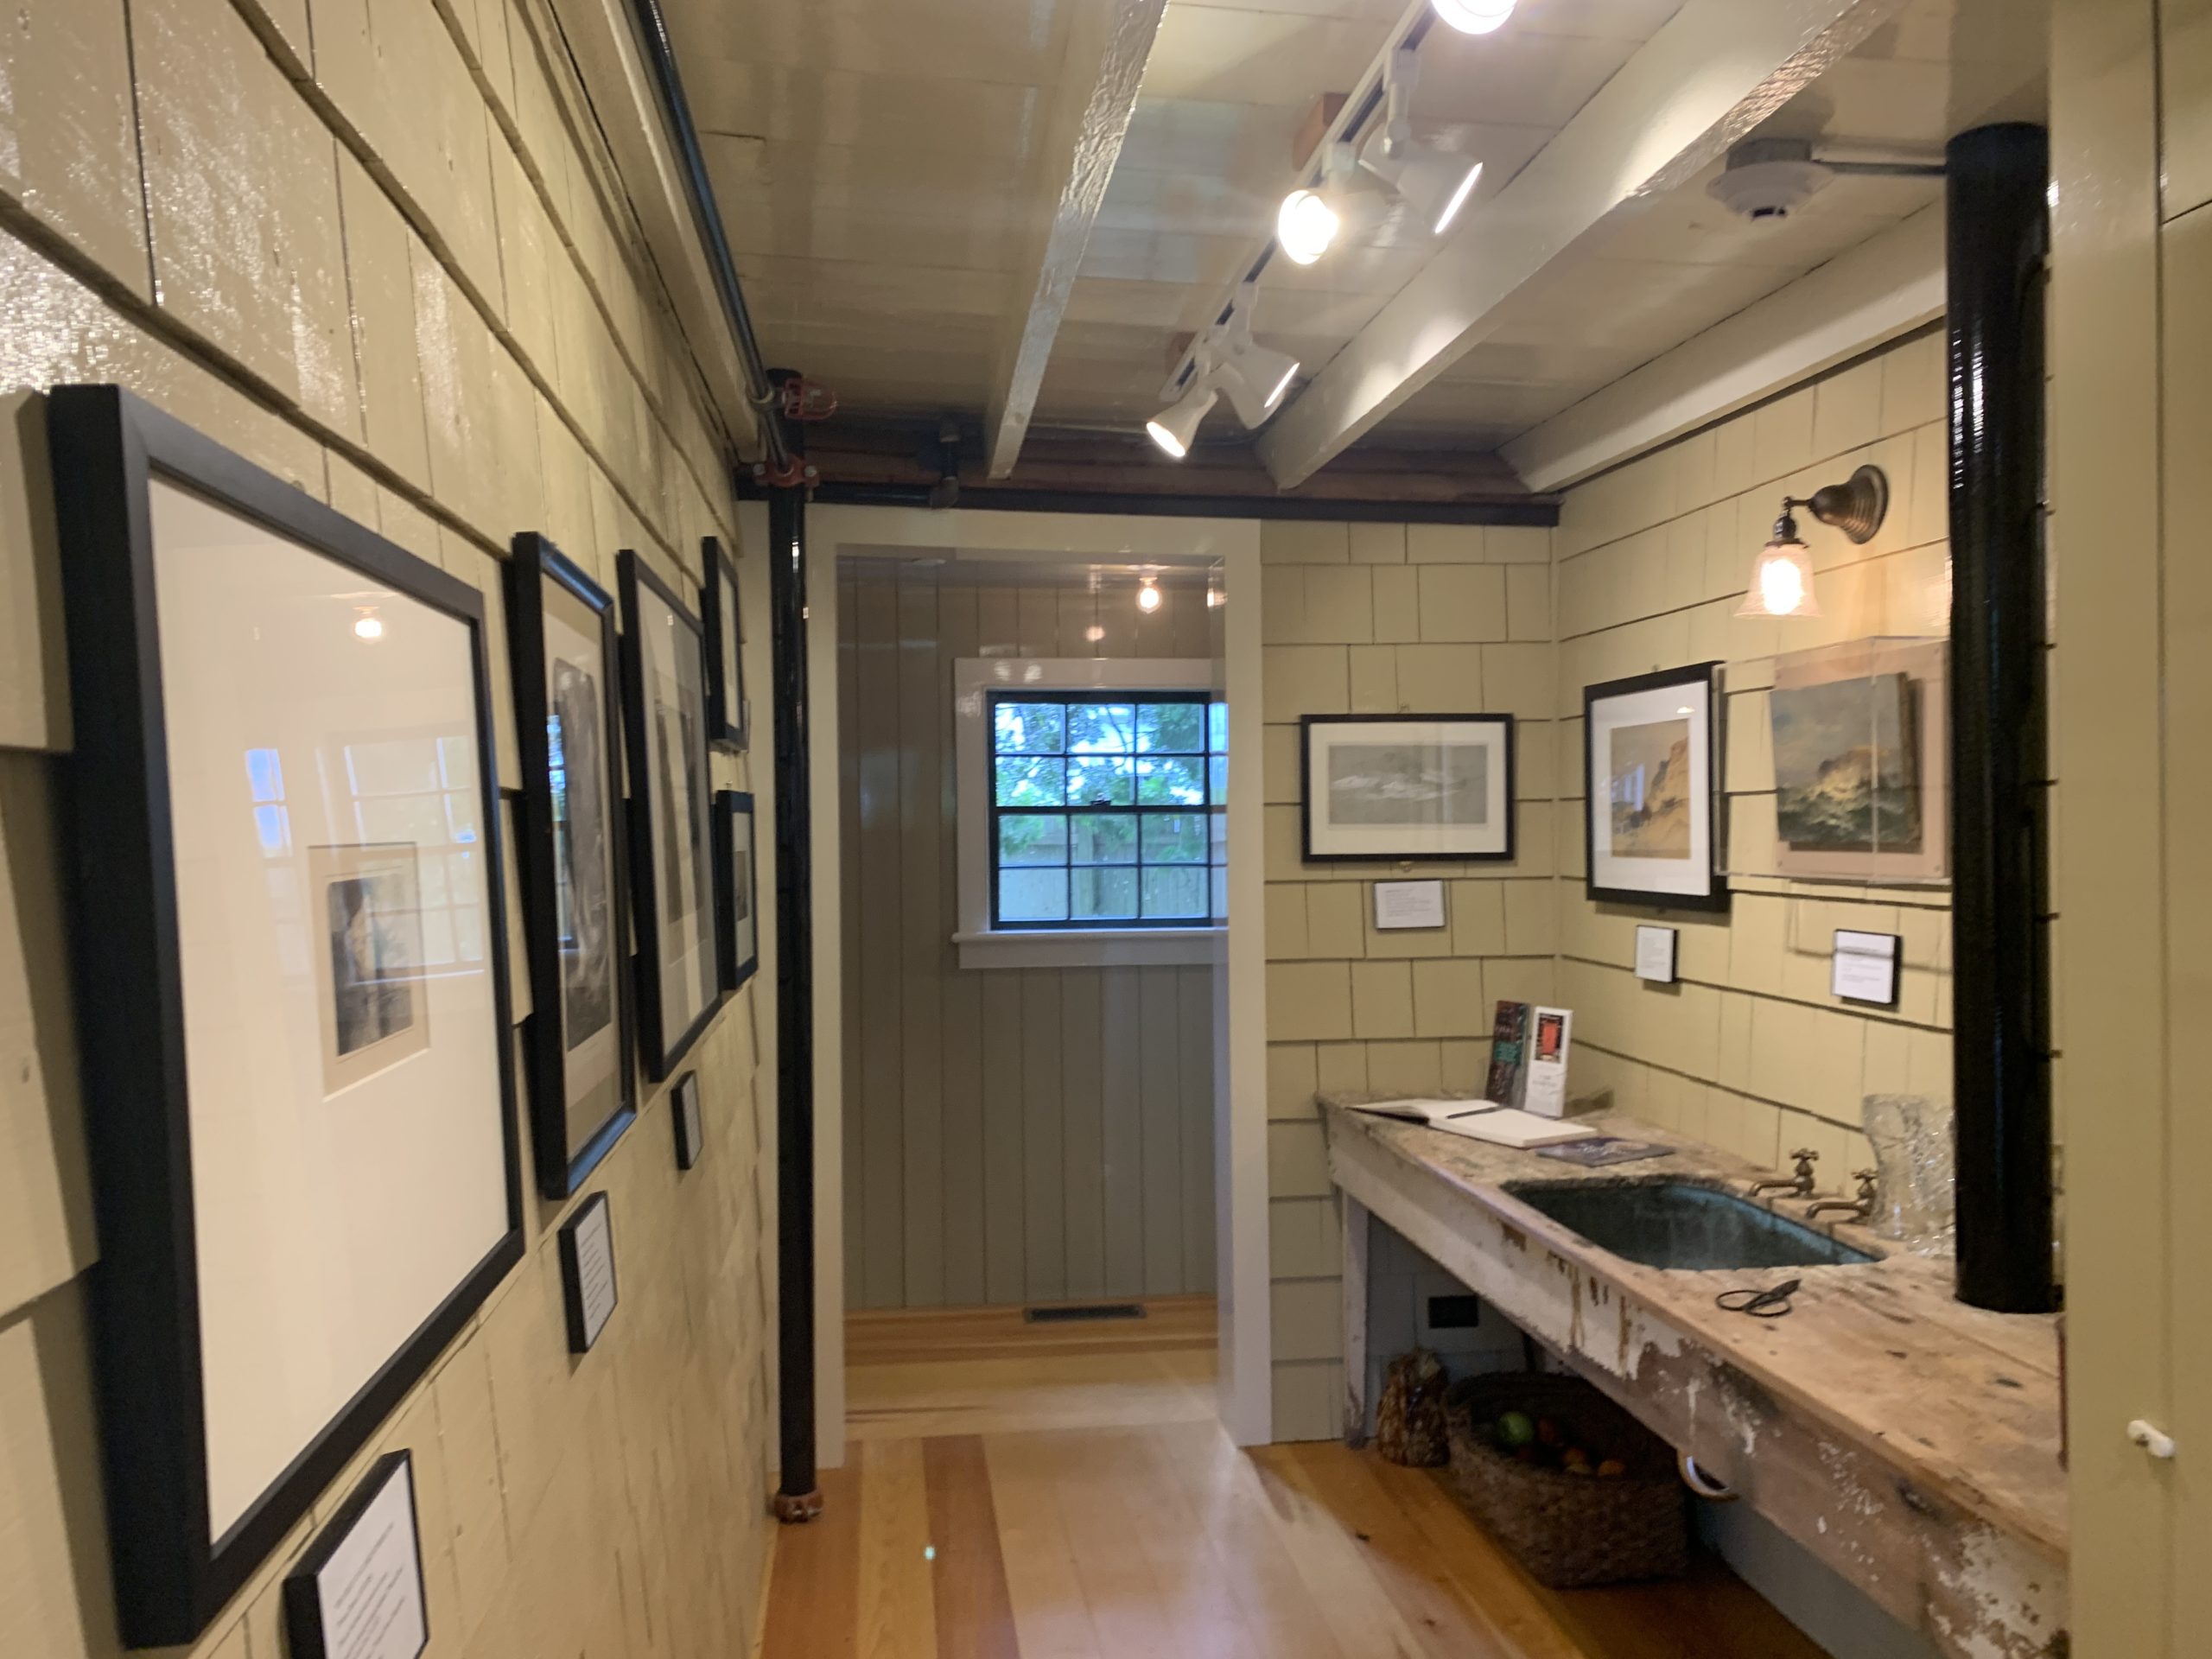 An exhibit space at the Moran House.